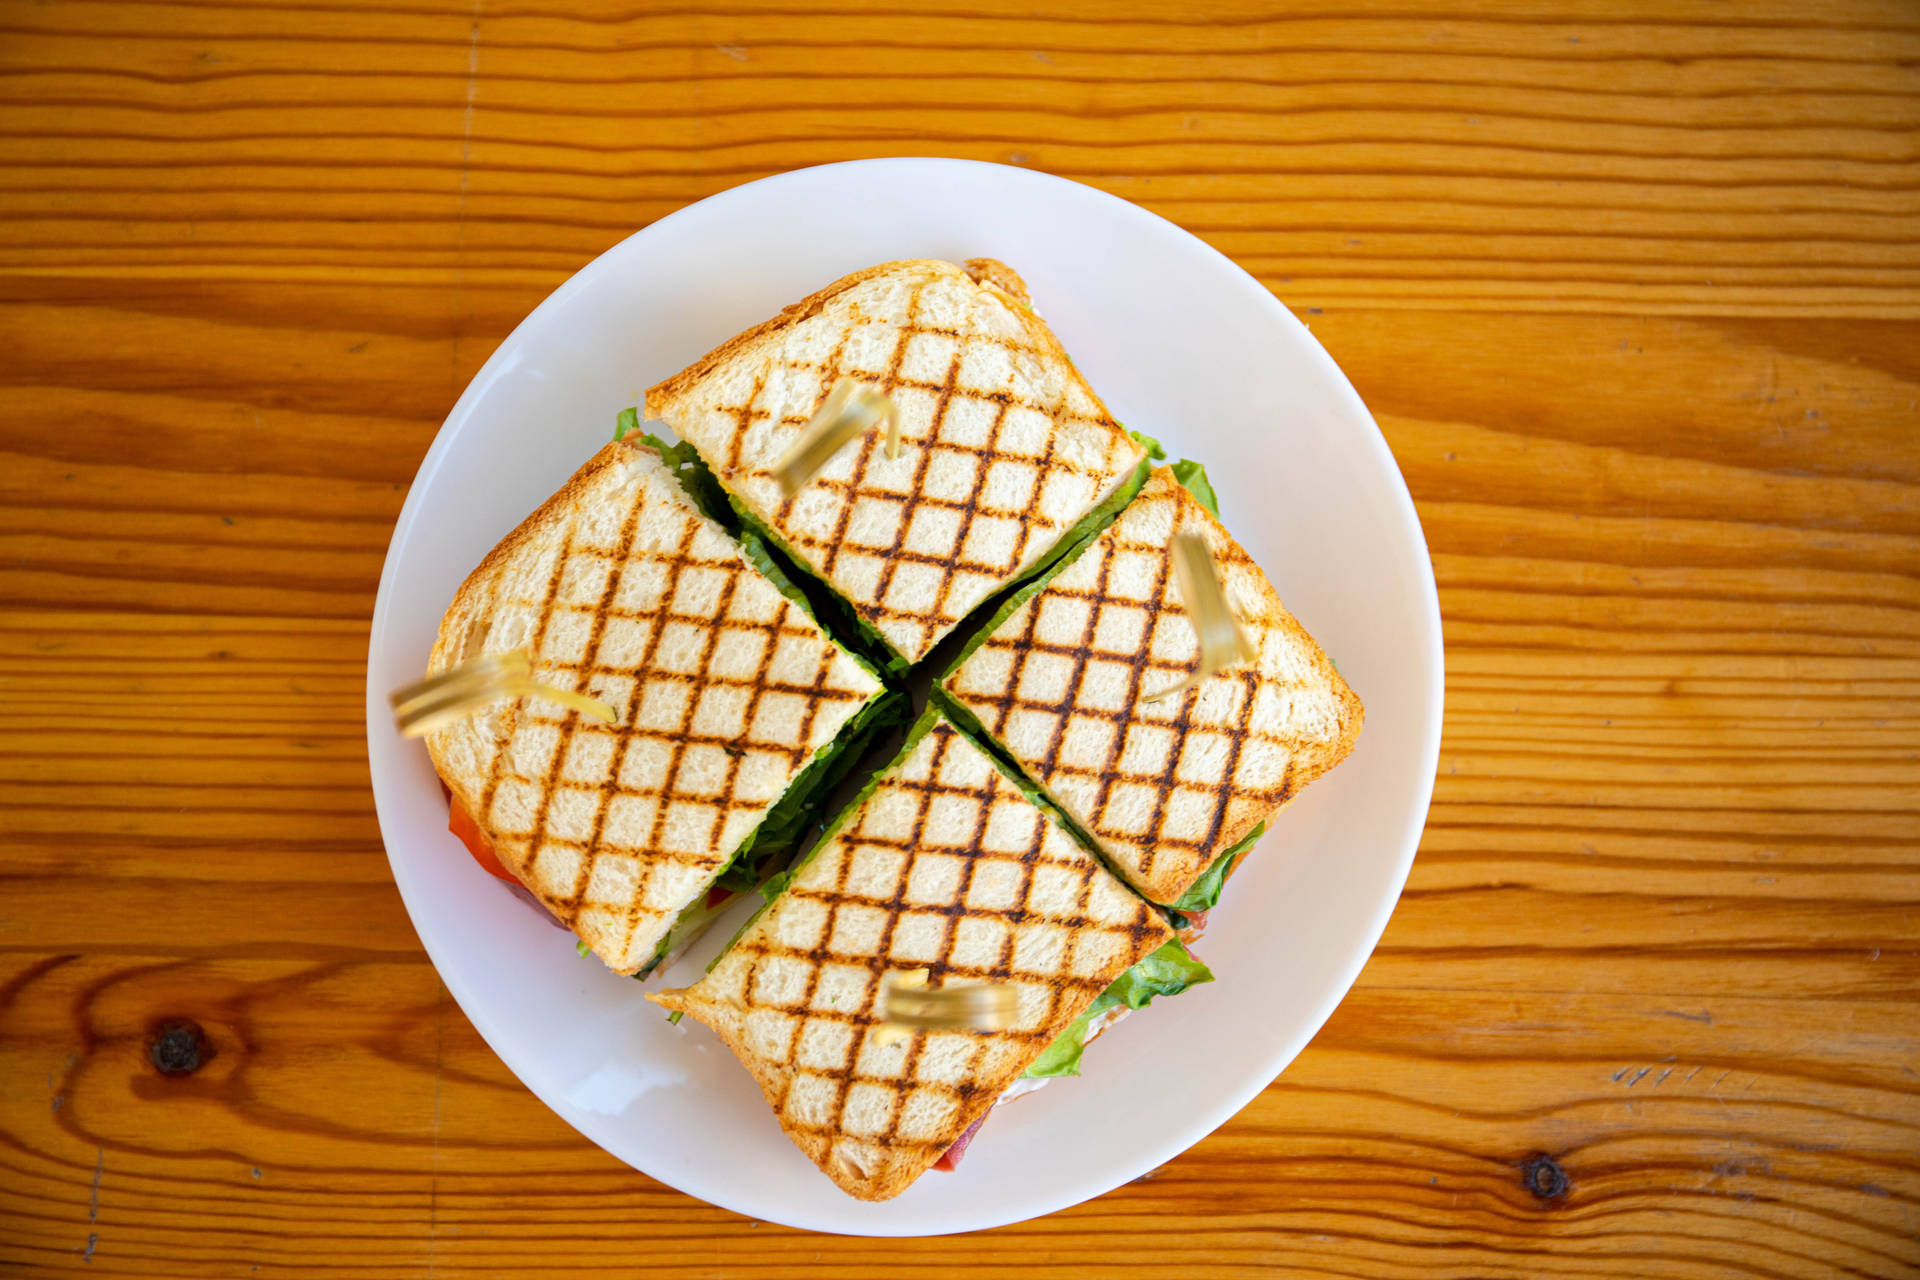 Sliced Sandwich 2560x1440 Food Picture